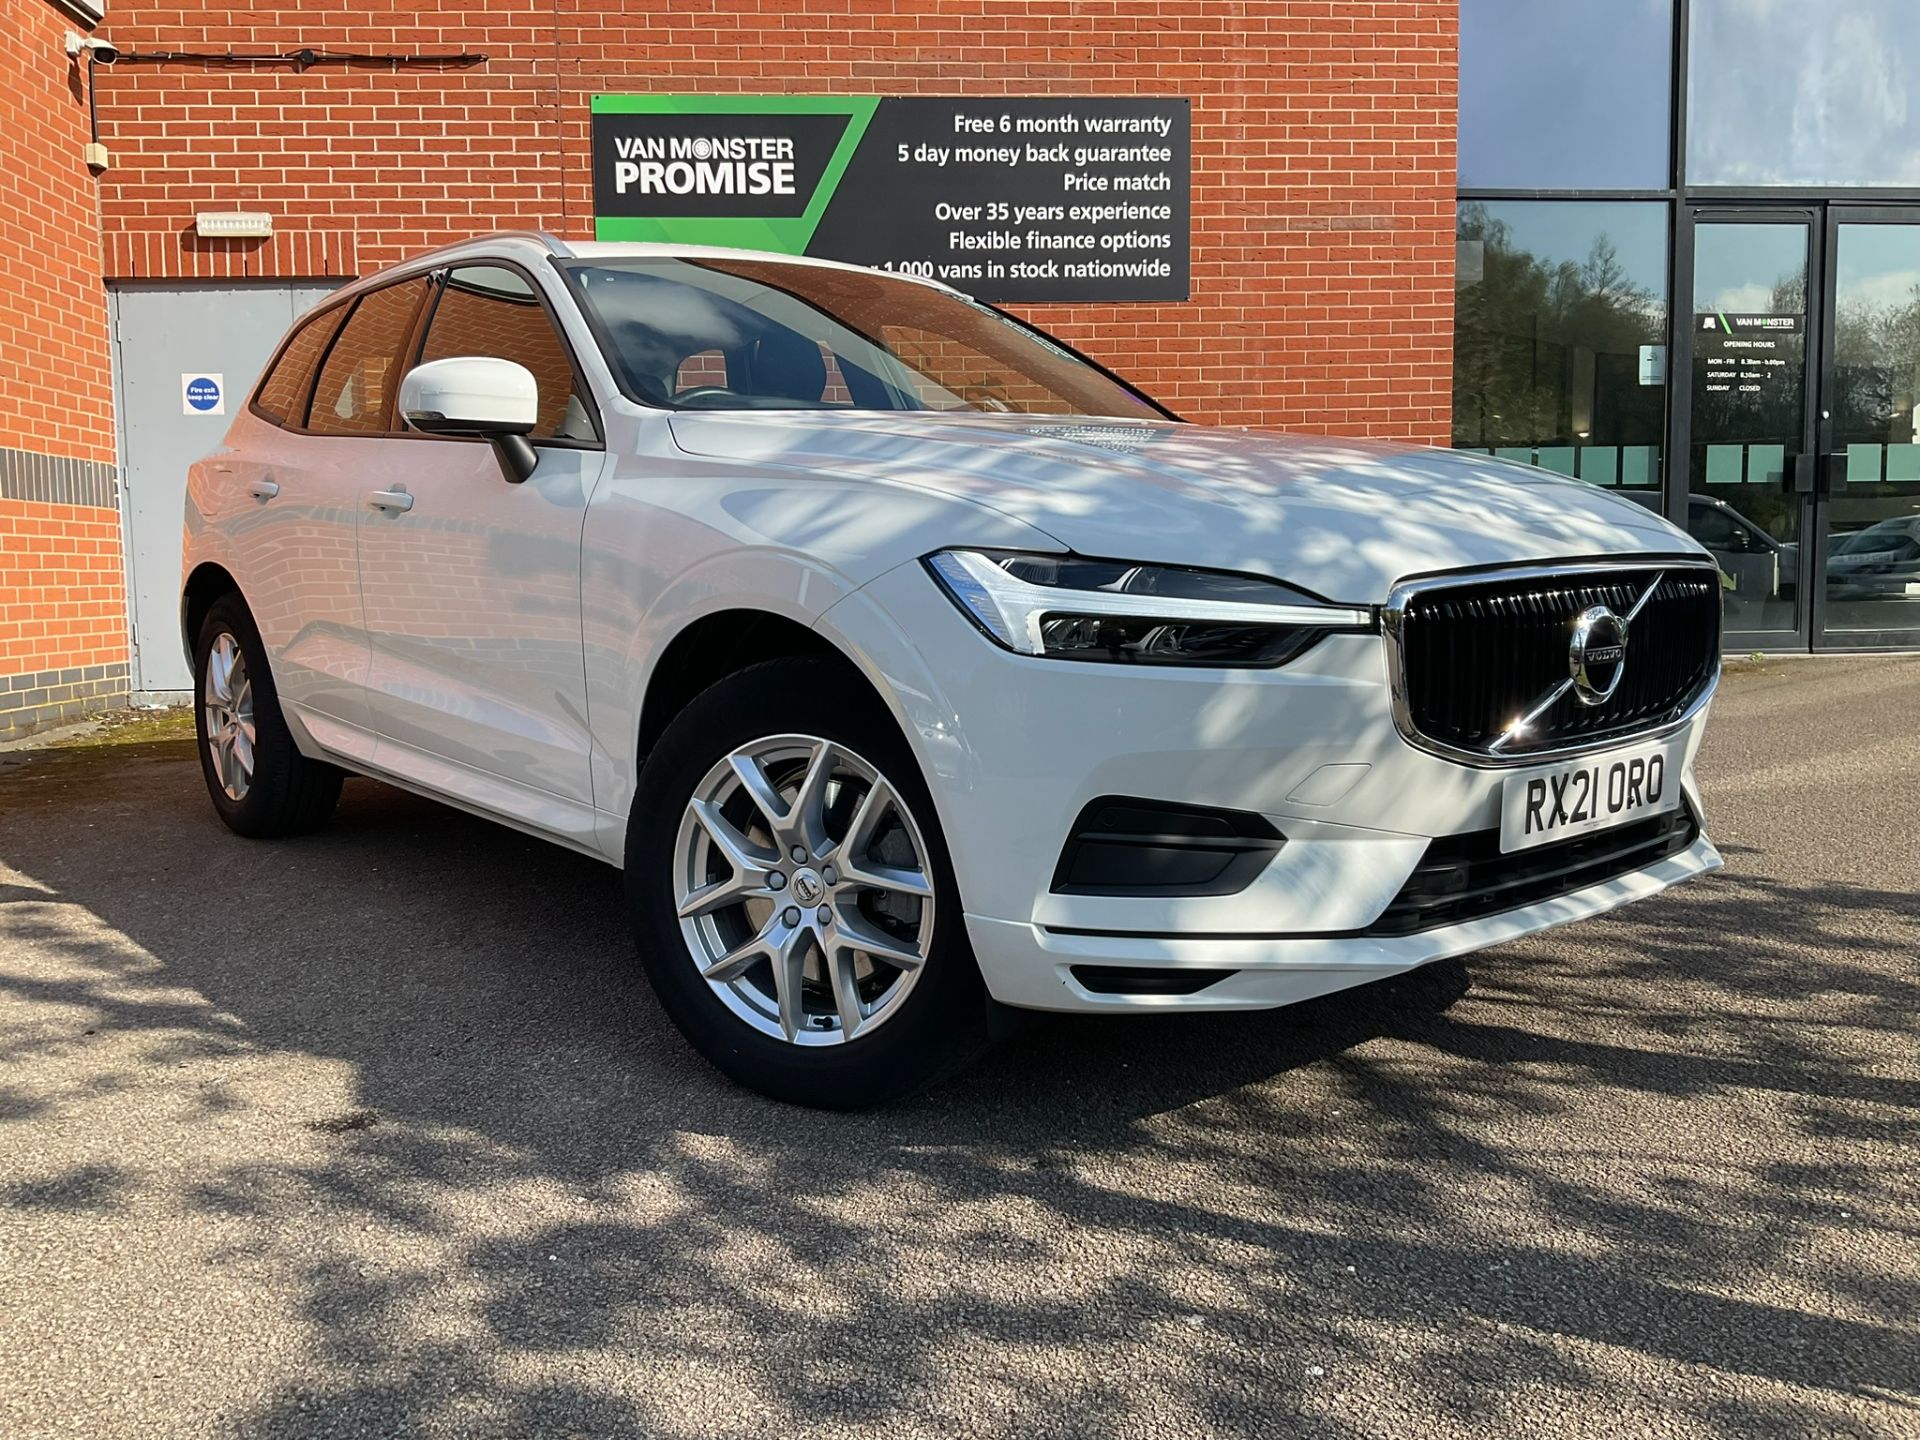 2021 Volvo Xc60 2.0 B5p [250] Momentum 5Dr Awd Geartronic (RX21ORO) Image 31